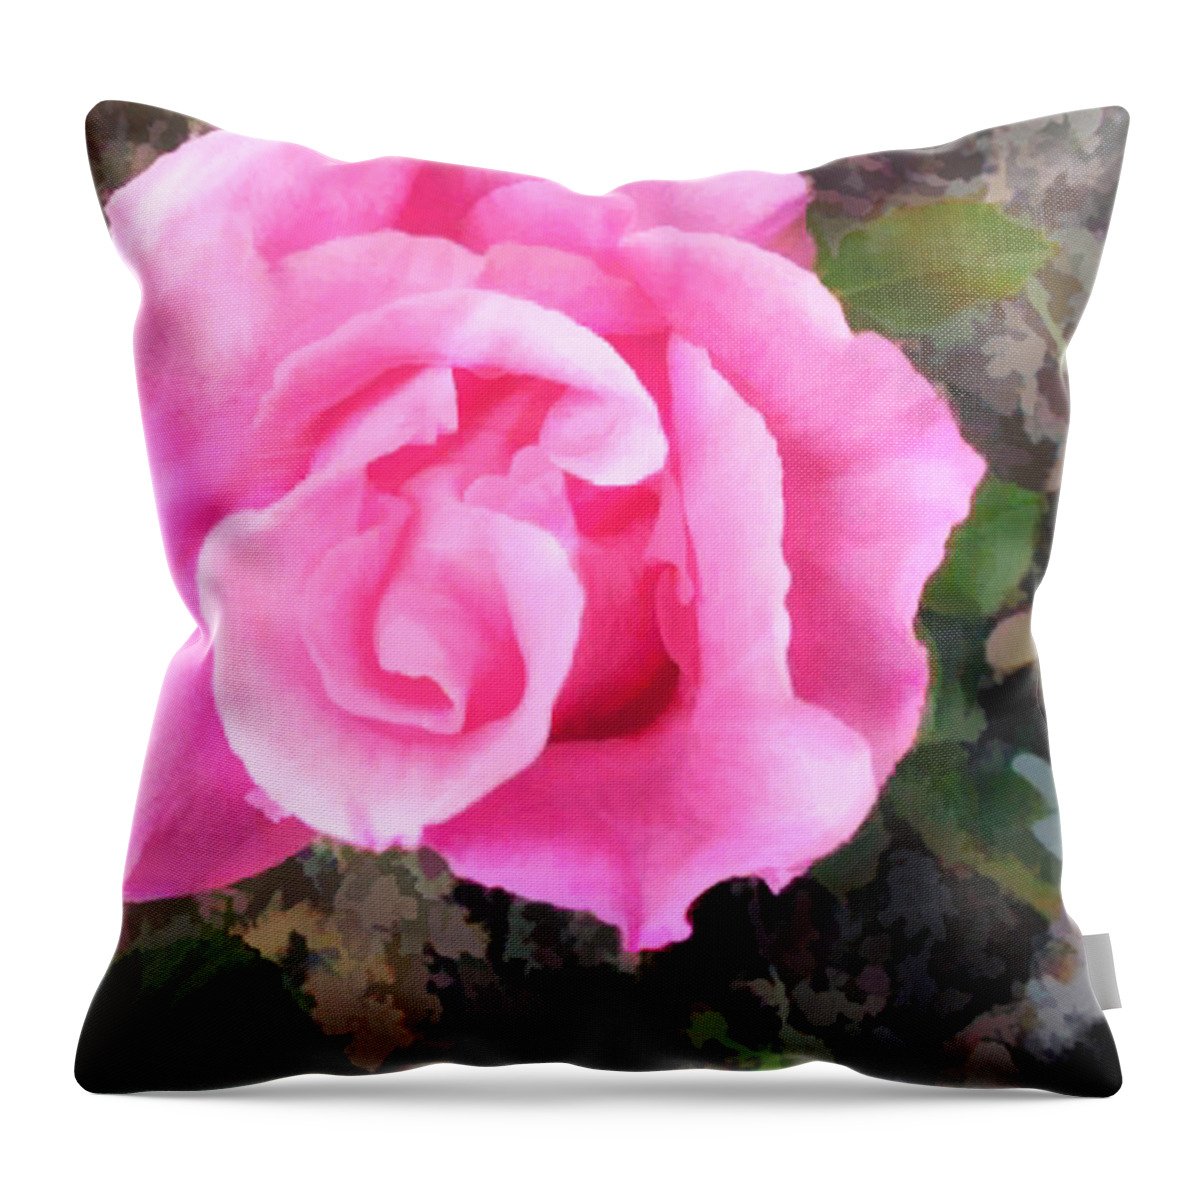 Roses Throw Pillow featuring the painting Deep Pink Watercolor Rose Blossom by Elaine Plesser